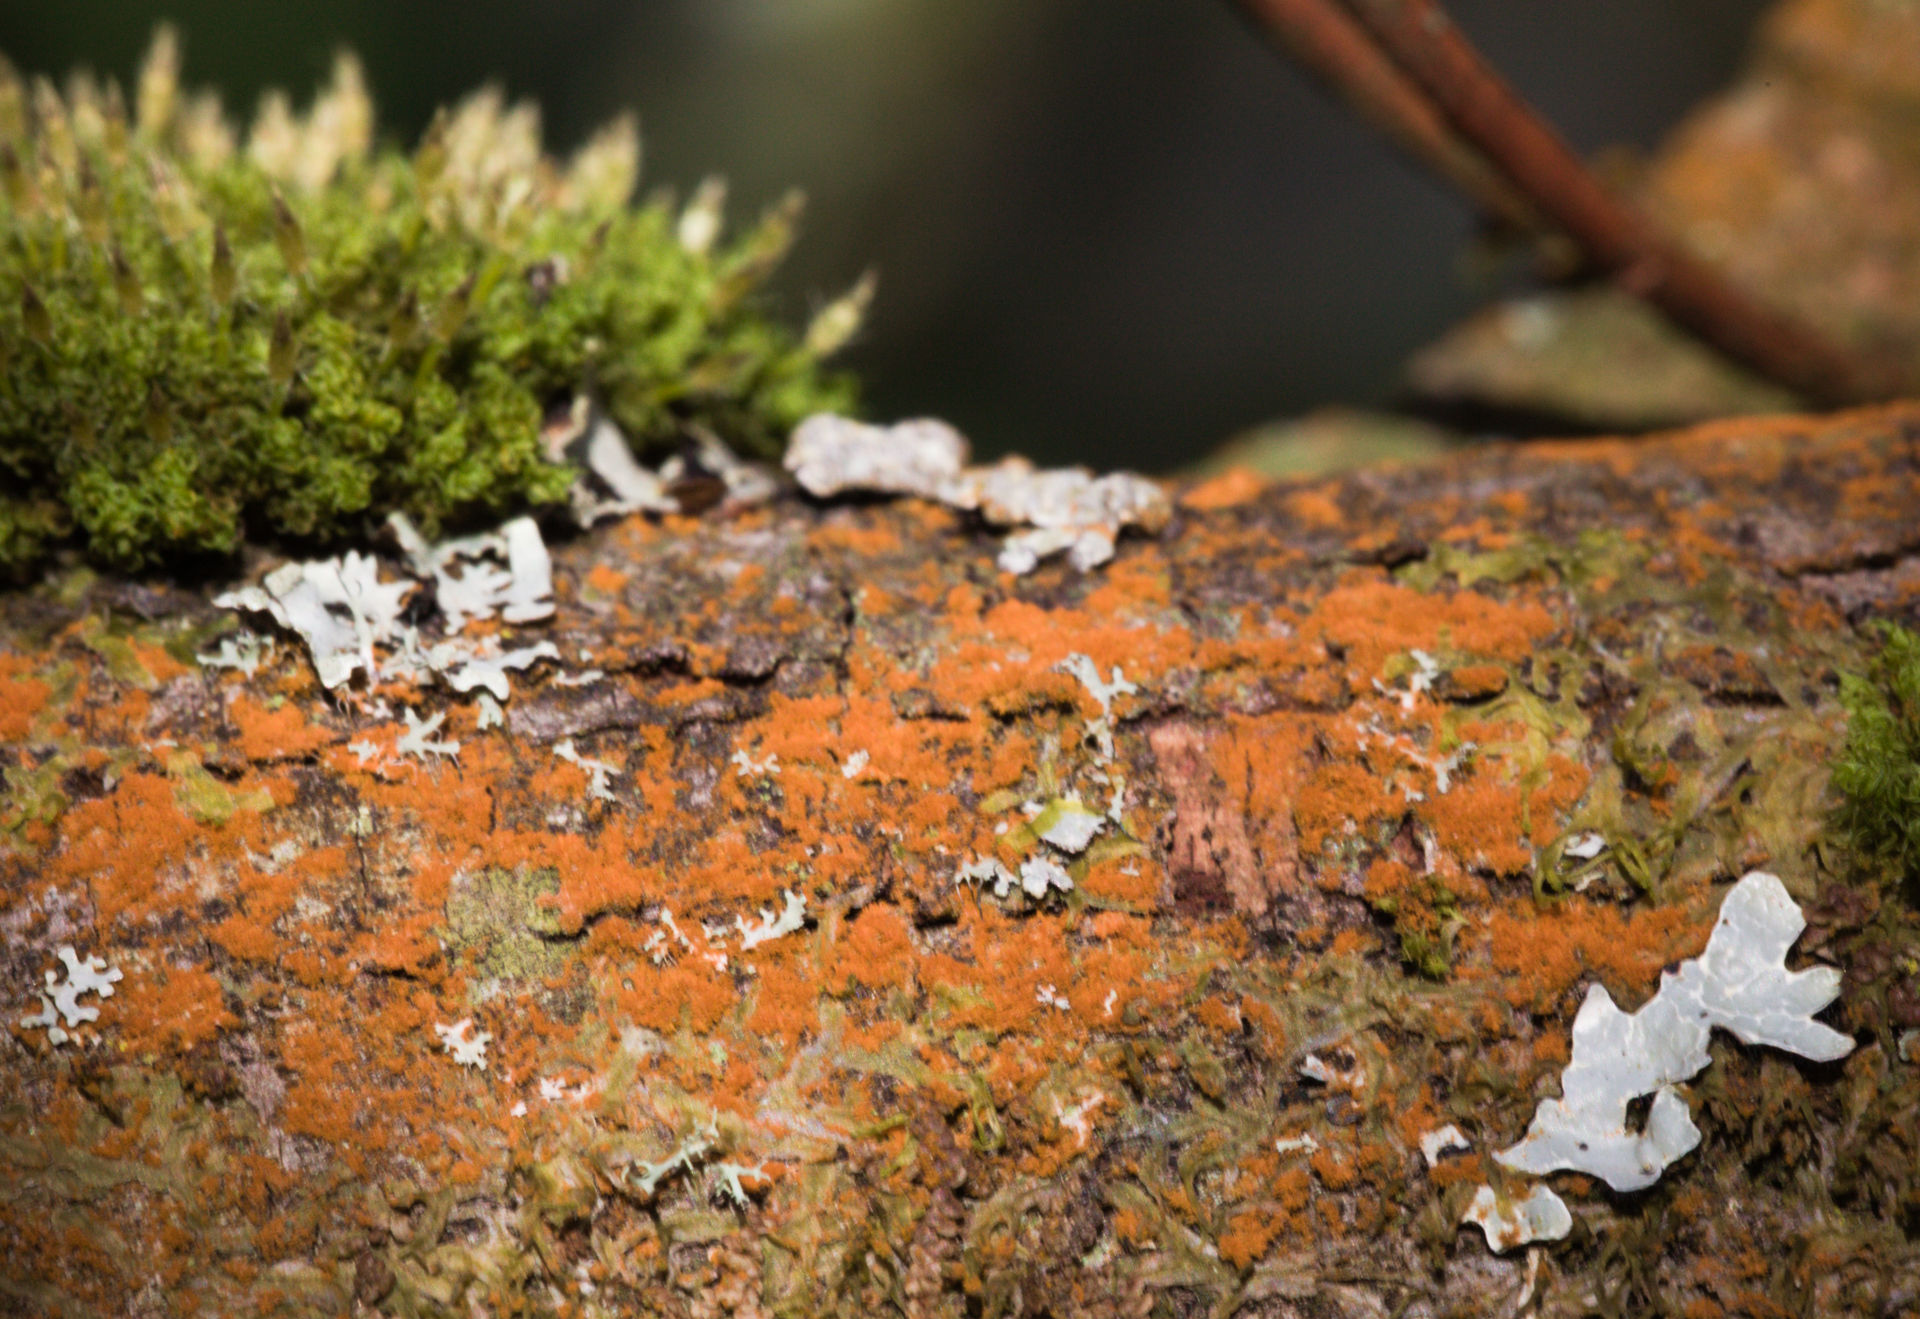 Lichen on willow branch in wood, South Wales